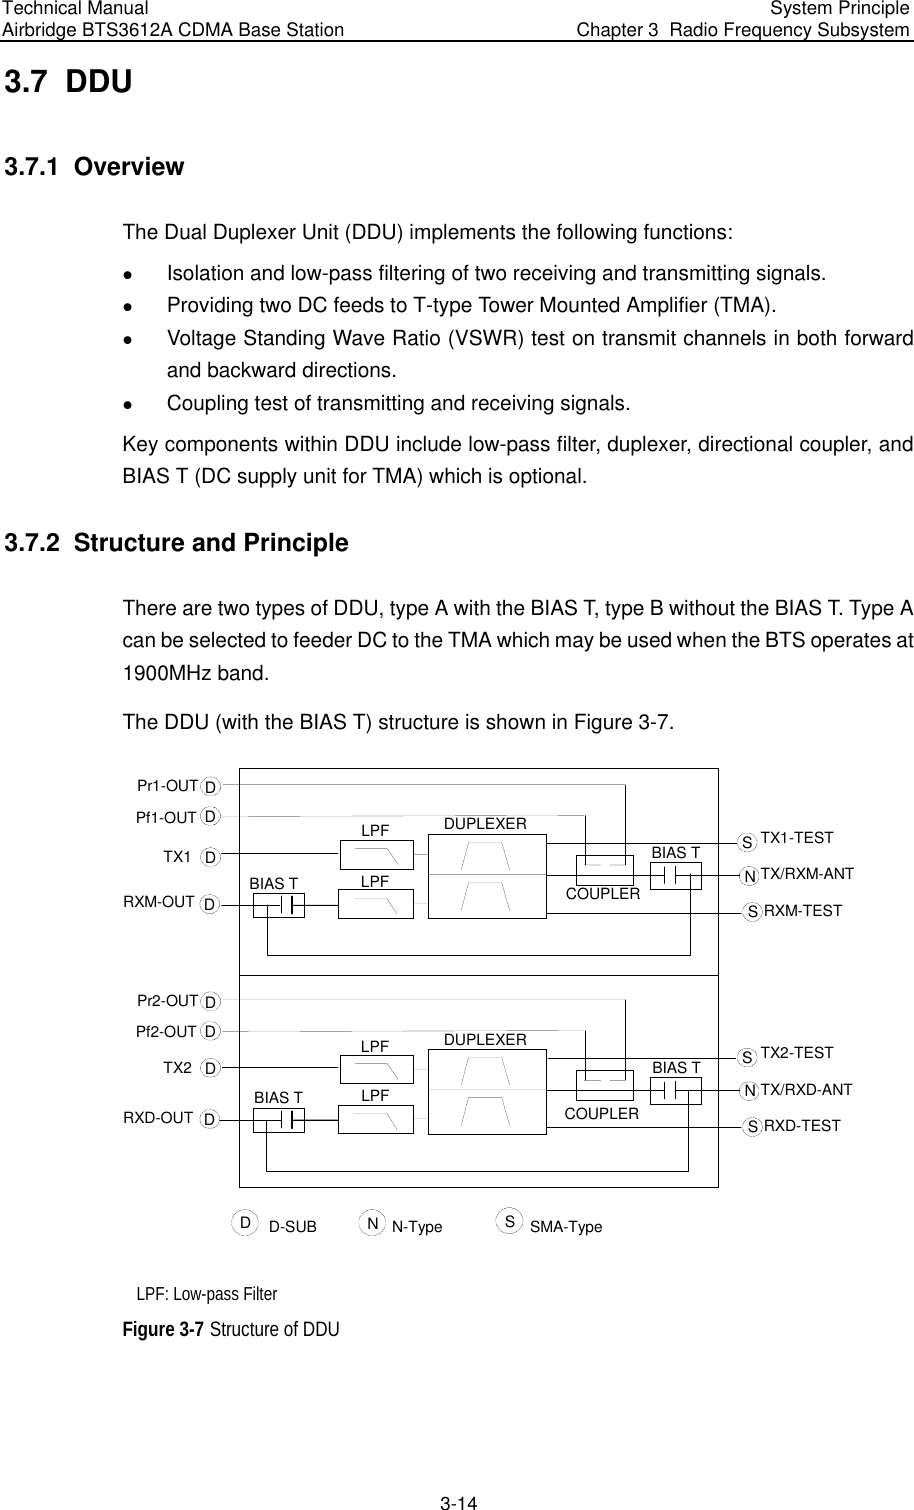 Technical Manual  Airbridge BTS3612A CDMA Base Station  System Principle Chapter 3  Radio Frequency Subsystem  3-14 3.7  DDU 3.7.1  Overview The Dual Duplexer Unit (DDU) implements the following functions: z Isolation and low-pass filtering of two receiving and transmitting signals. z Providing two DC feeds to T-type Tower Mounted Amplifier (TMA). z Voltage Standing Wave Ratio (VSWR) test on transmit channels in both forward and backward directions. z Coupling test of transmitting and receiving signals.  Key components within DDU include low-pass filter, duplexer, directional coupler, and BIAS T (DC supply unit for TMA) which is optional. 3.7.2  Structure and Principle There are two types of DDU, type A with the BIAS T, type B without the BIAS T. Type A can be selected to feeder DC to the TMA which may be used when the BTS operates at 1900MHz band. The DDU (with the BIAS T) structure is shown in Figure 3-7.  ND-SUB        SDN-Type SMA-TypeLPF DUPLEXERCOUPLERNSSDDDDTX2-TESTTX/RXD-ANTRXD-TESTPf2-OUTPr2-OUTTX2RXD-OUTLPFLPFDUPLEXERCOUPLER NSSDDDDTX1-TESTTX/RXM-ANTRXM-TESTPf1-OUTPr1-OUTTX1RXM-OUTLPFBIAS TBIAS TBIAS TBIAS T  LPF: Low-pass Filter Figure 3-7 Structure of DDU 